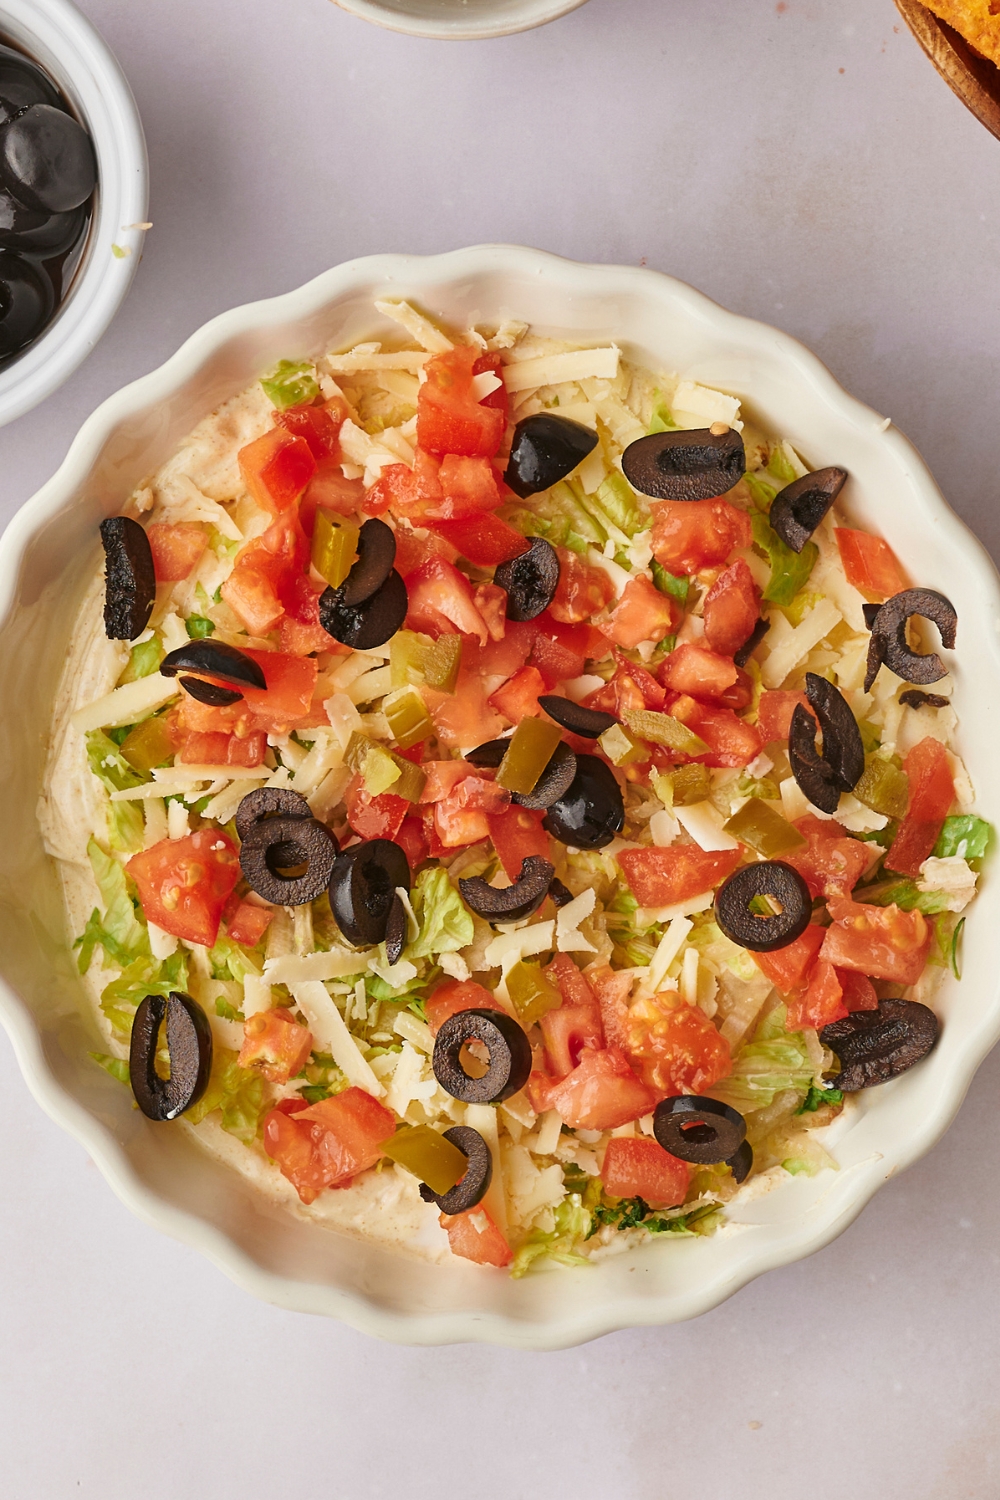 A serving bowl with creamy taco dip base, shredded lettuce, diced tomatoes, and sliced olives on it.